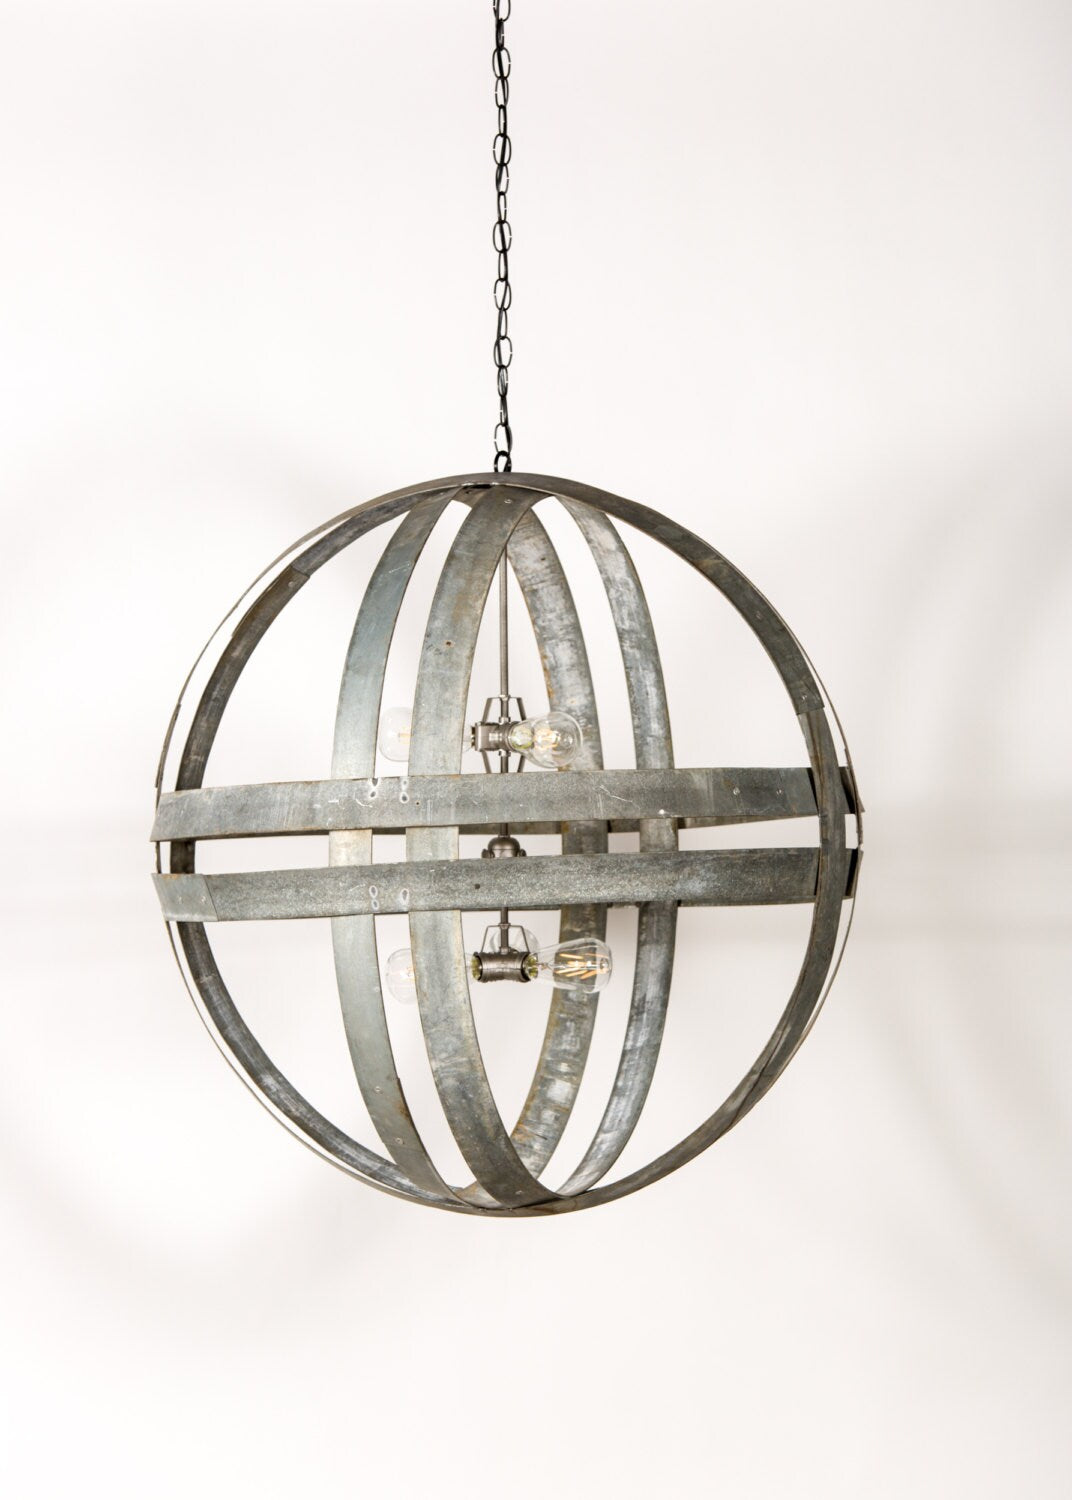 Wine Barrel Ring Chandelier - XL Cyclopean - Made from retired California wine barrel rings - 100% Recycled!